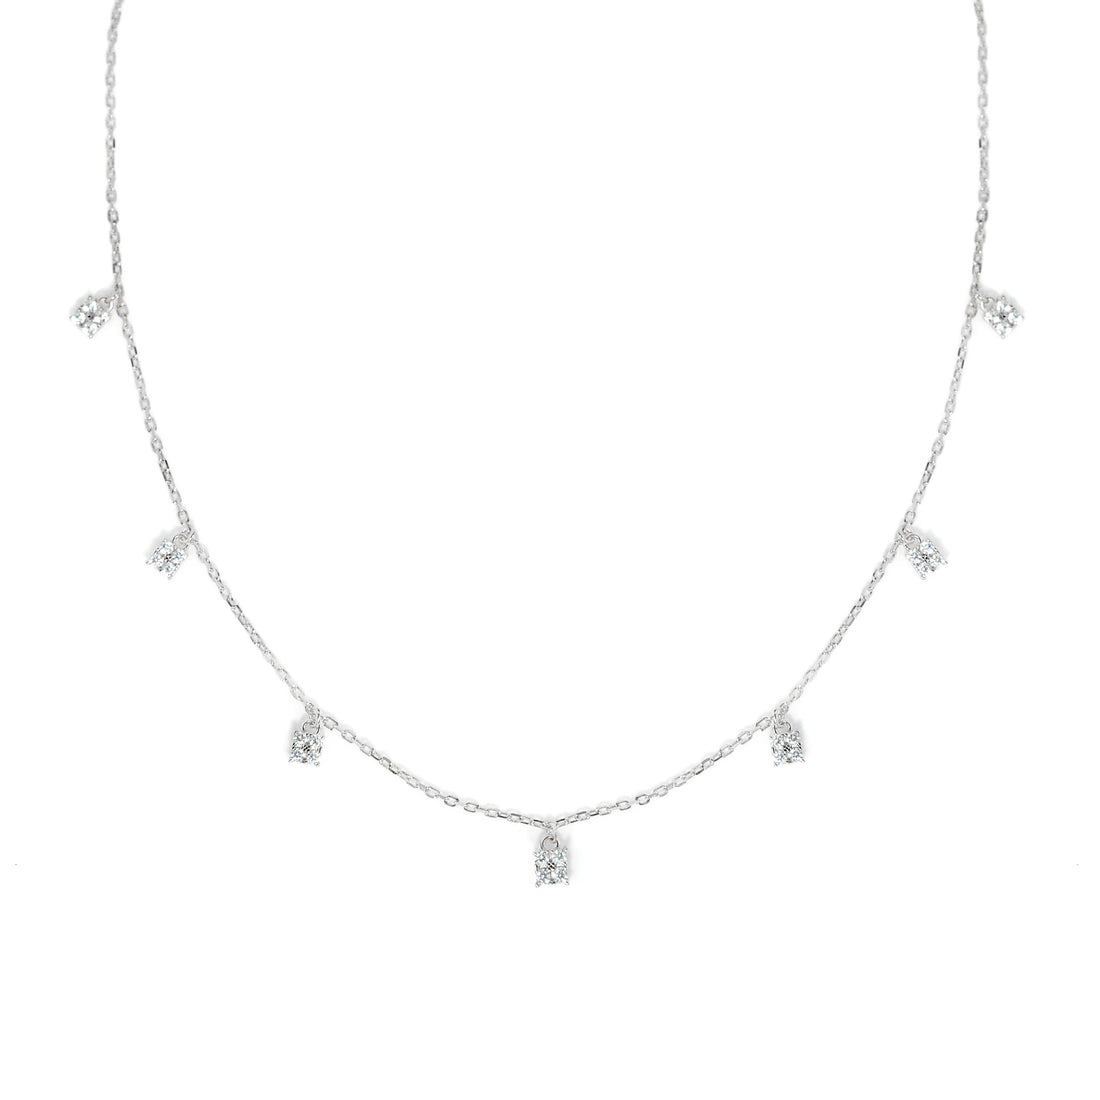 Exquisite Dolce Mondo Silver Charm Necklace with Sparkling Cubic Zirconia